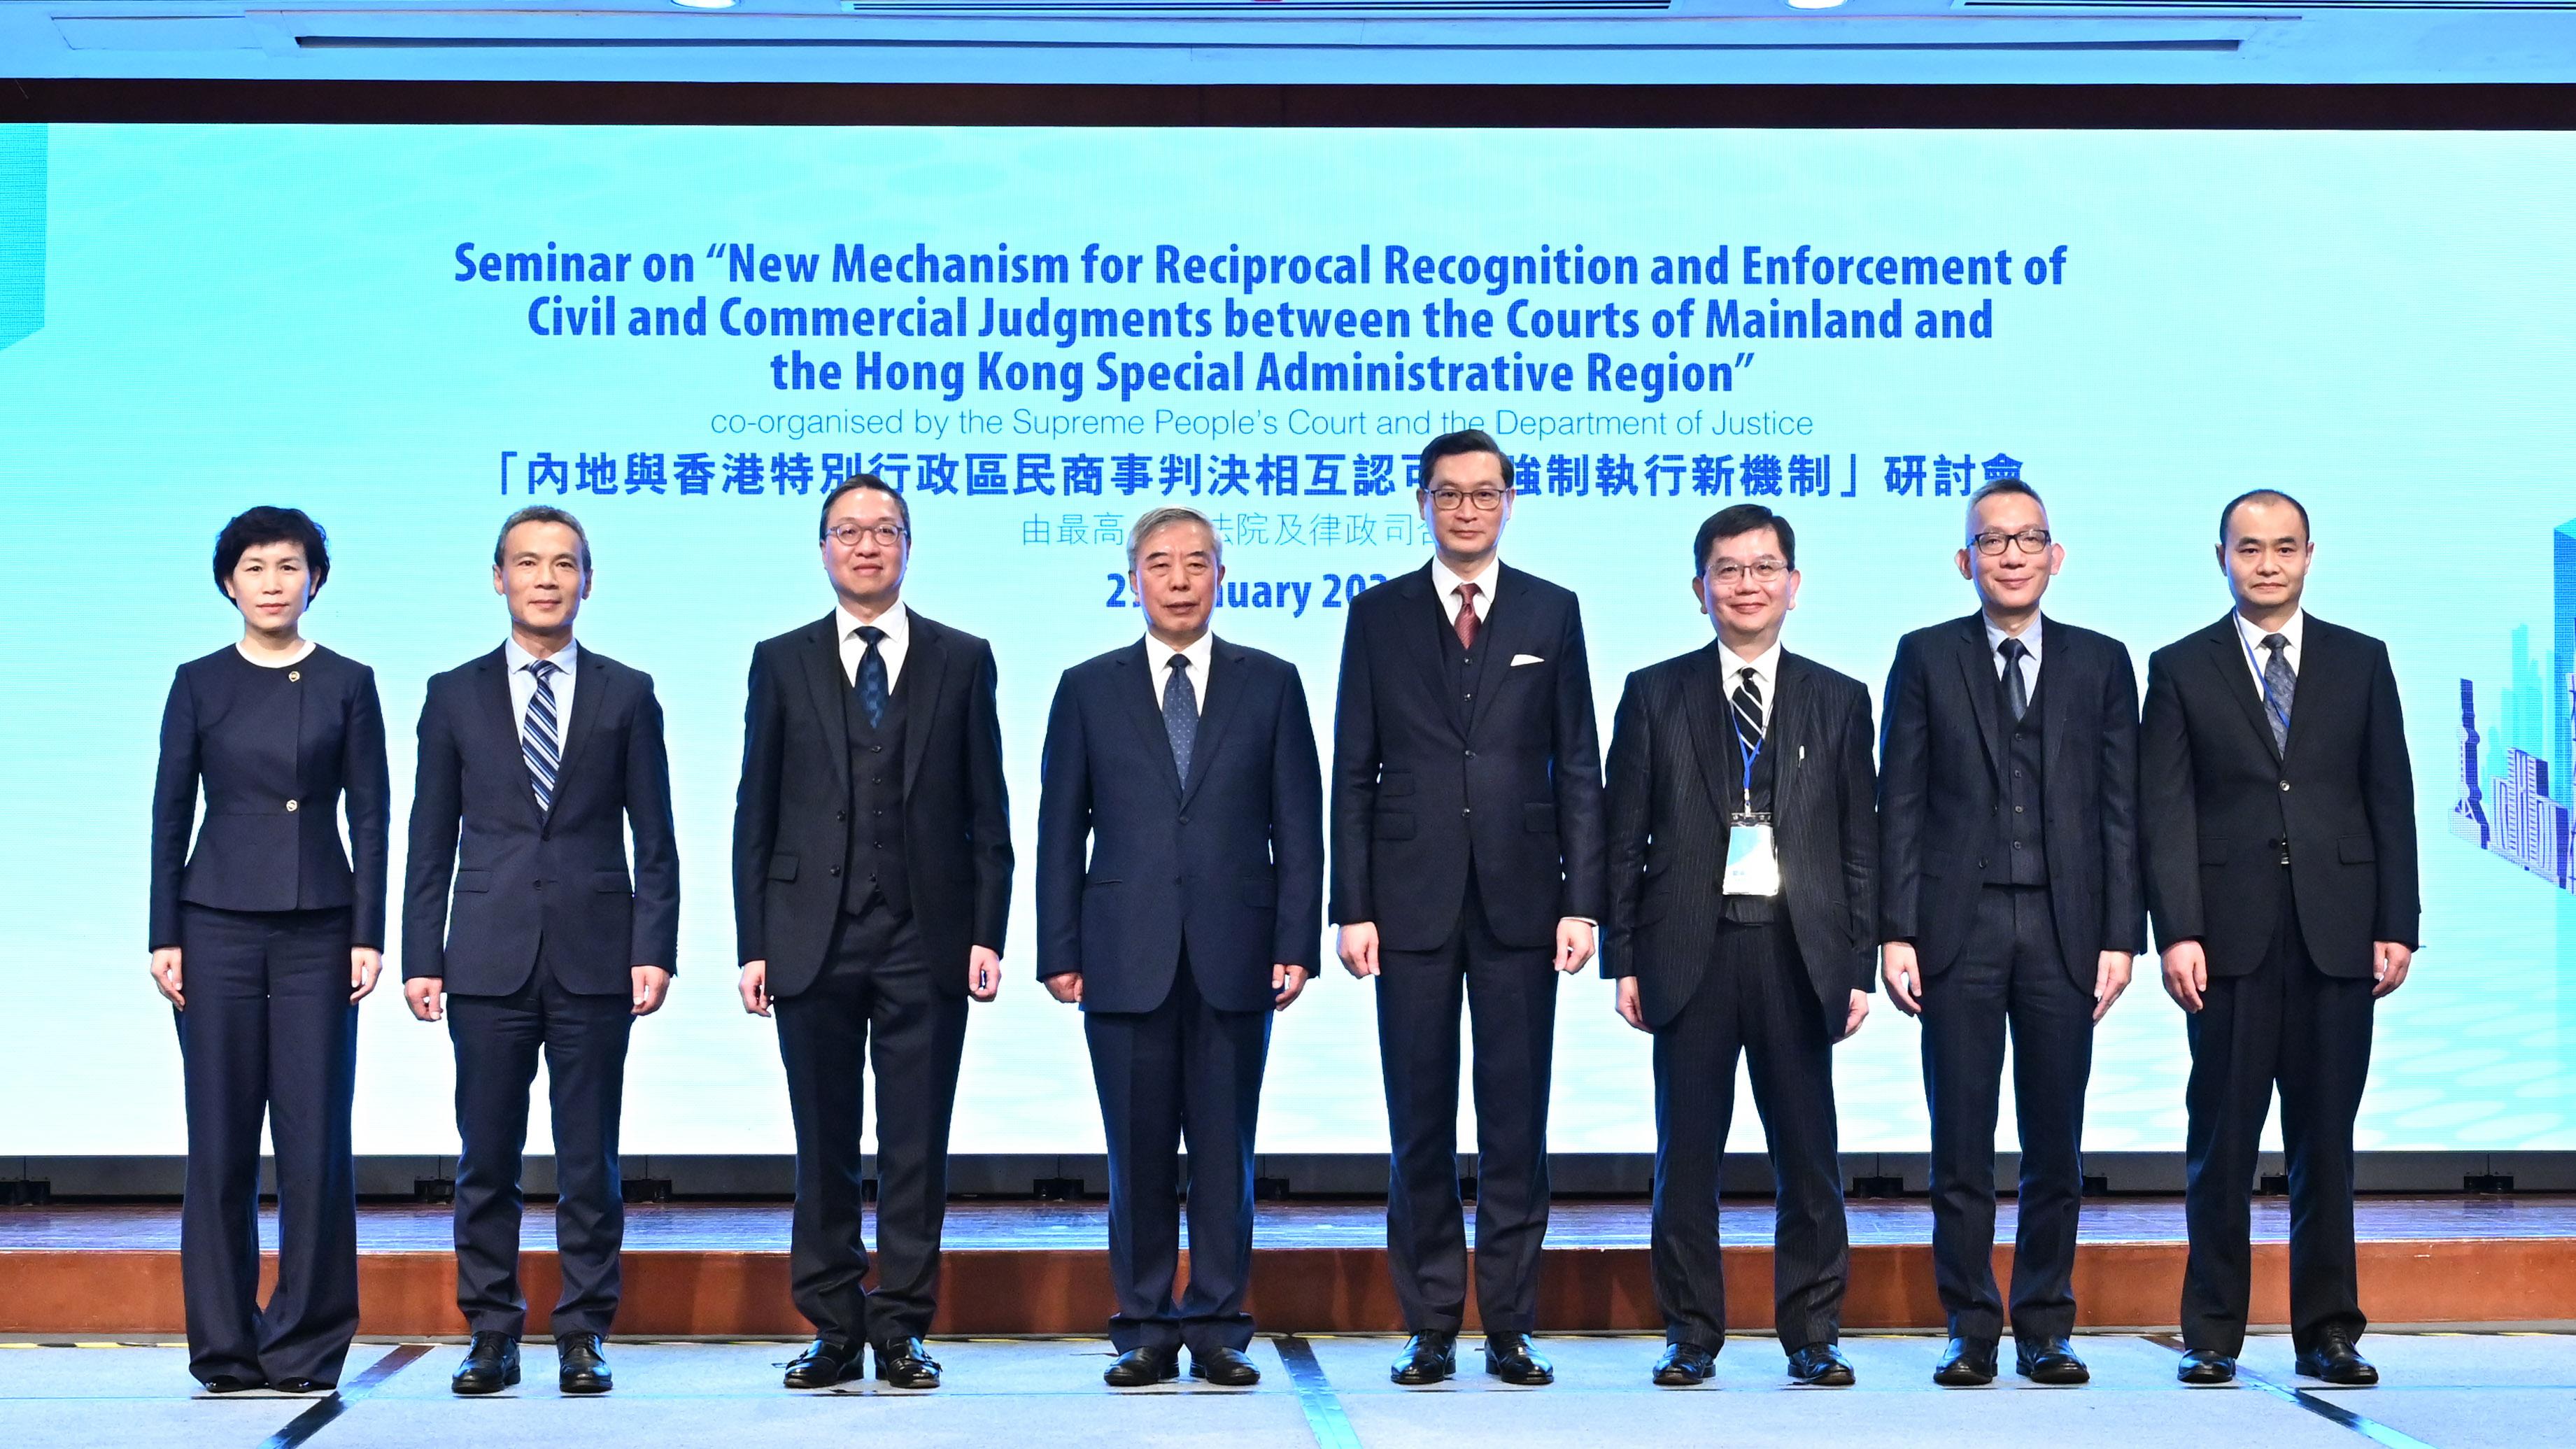 The seminar on "New Mechanism for Reciprocal Recognition and Enforcement of Civil and Commercial Judgments between the Courts of Mainland and the Hong Kong Special Administrative Region" co-organised by the Supreme People's Court (SPC) and the Department of Justice (DoJ) was held today (January 29). Photo shows (from left) Deputy Director General of the Research Office of the SPC Ms Si Yanli; the Director General of the Research Office of the SPC, Mr Zhou Jiahai; the Secretary for Justice, Mr Paul Lam, SC; Vice-president of the SPC Mr Yang Wanming; the Chief Judge of the High Court, Mr Justice Jeremy Poon; the Registrar of the High Court, Mr Simon Kwang; the Solicitor General of the DoJ, Mr Llewellyn Mui; and Judge Guo Zaiyu of the Fourth Civil Division of the SPC at the seminar.